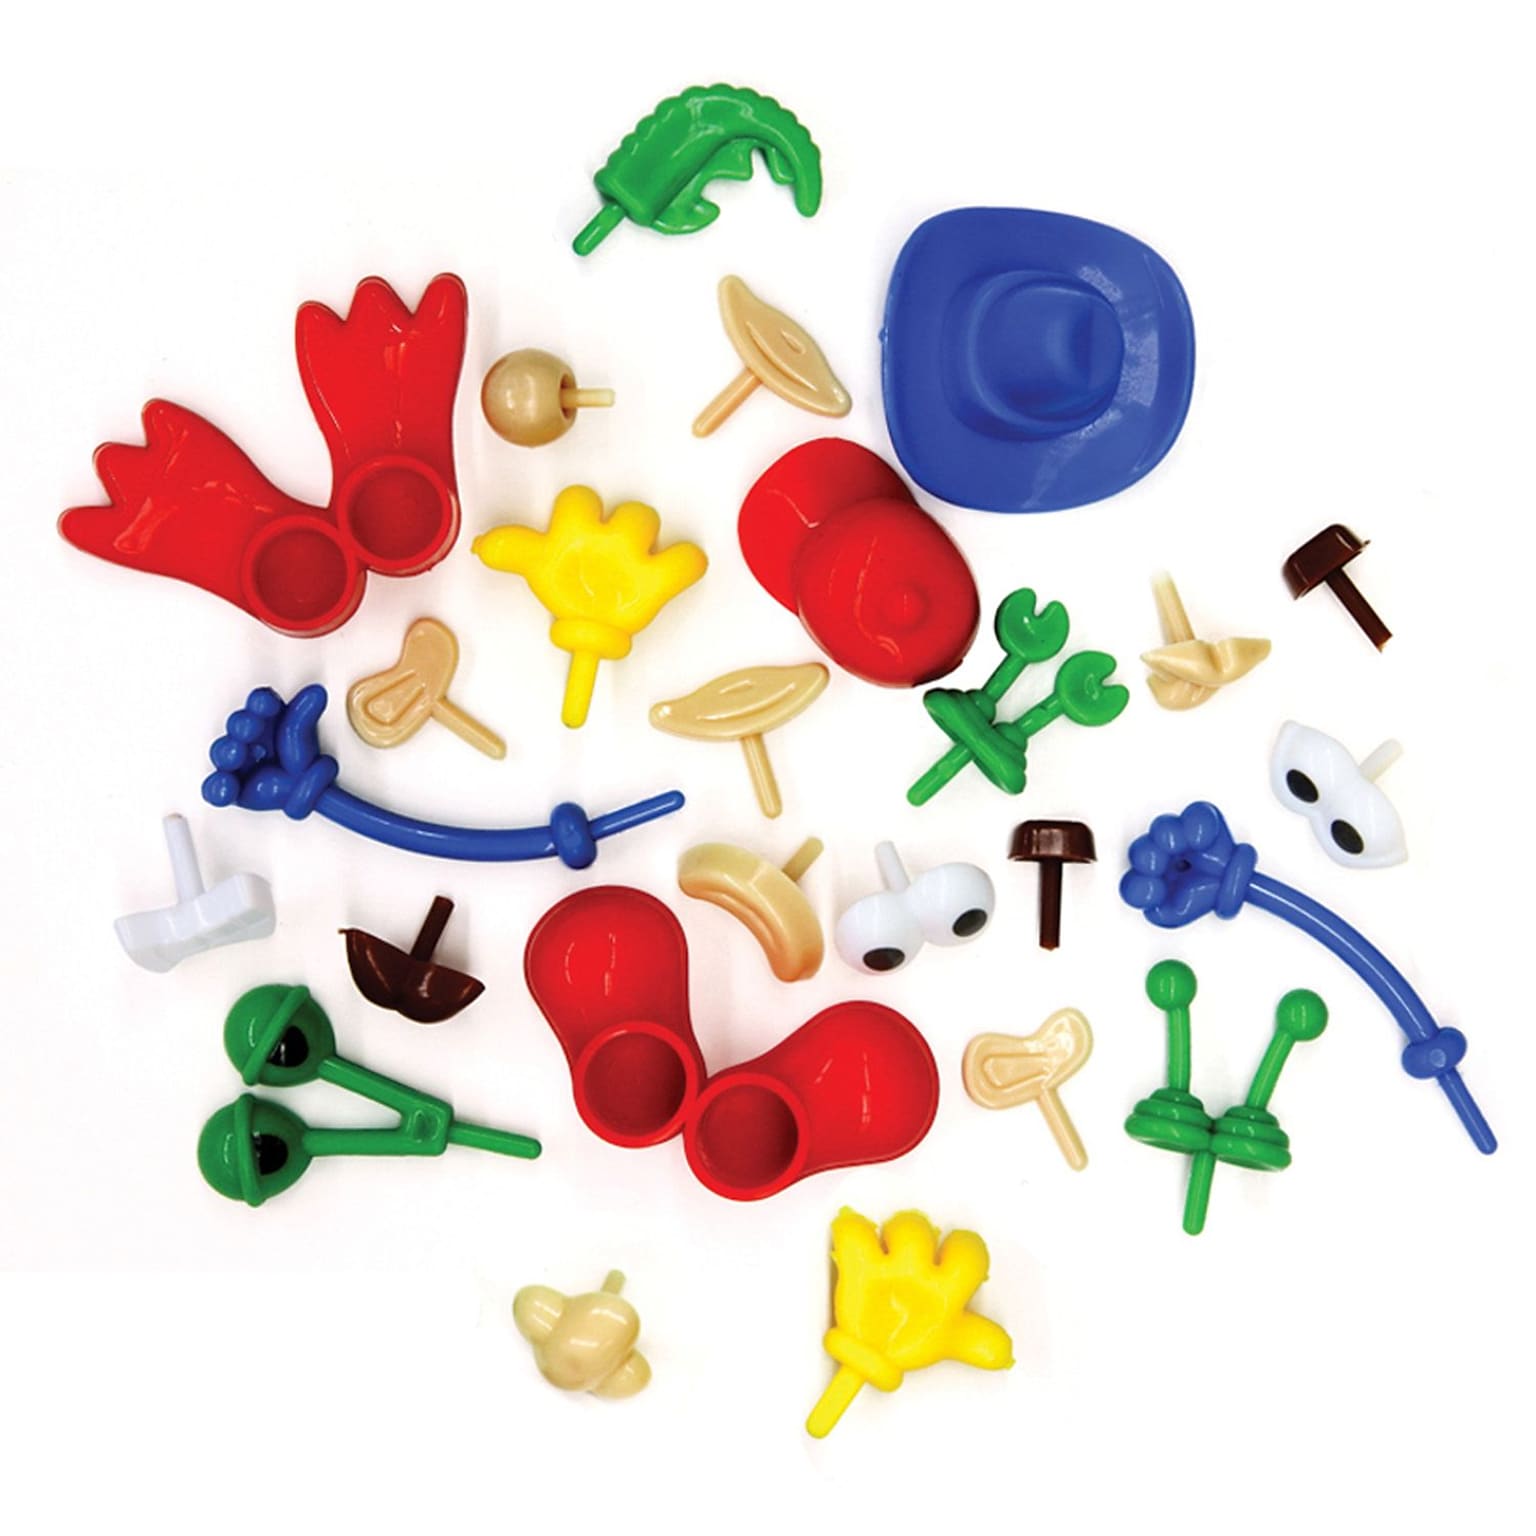 Creativity Street Modeling Dough & Clay Body Parts & Accessories, Assorted Shapes & Colors, 26 Pieces (CK-9660)